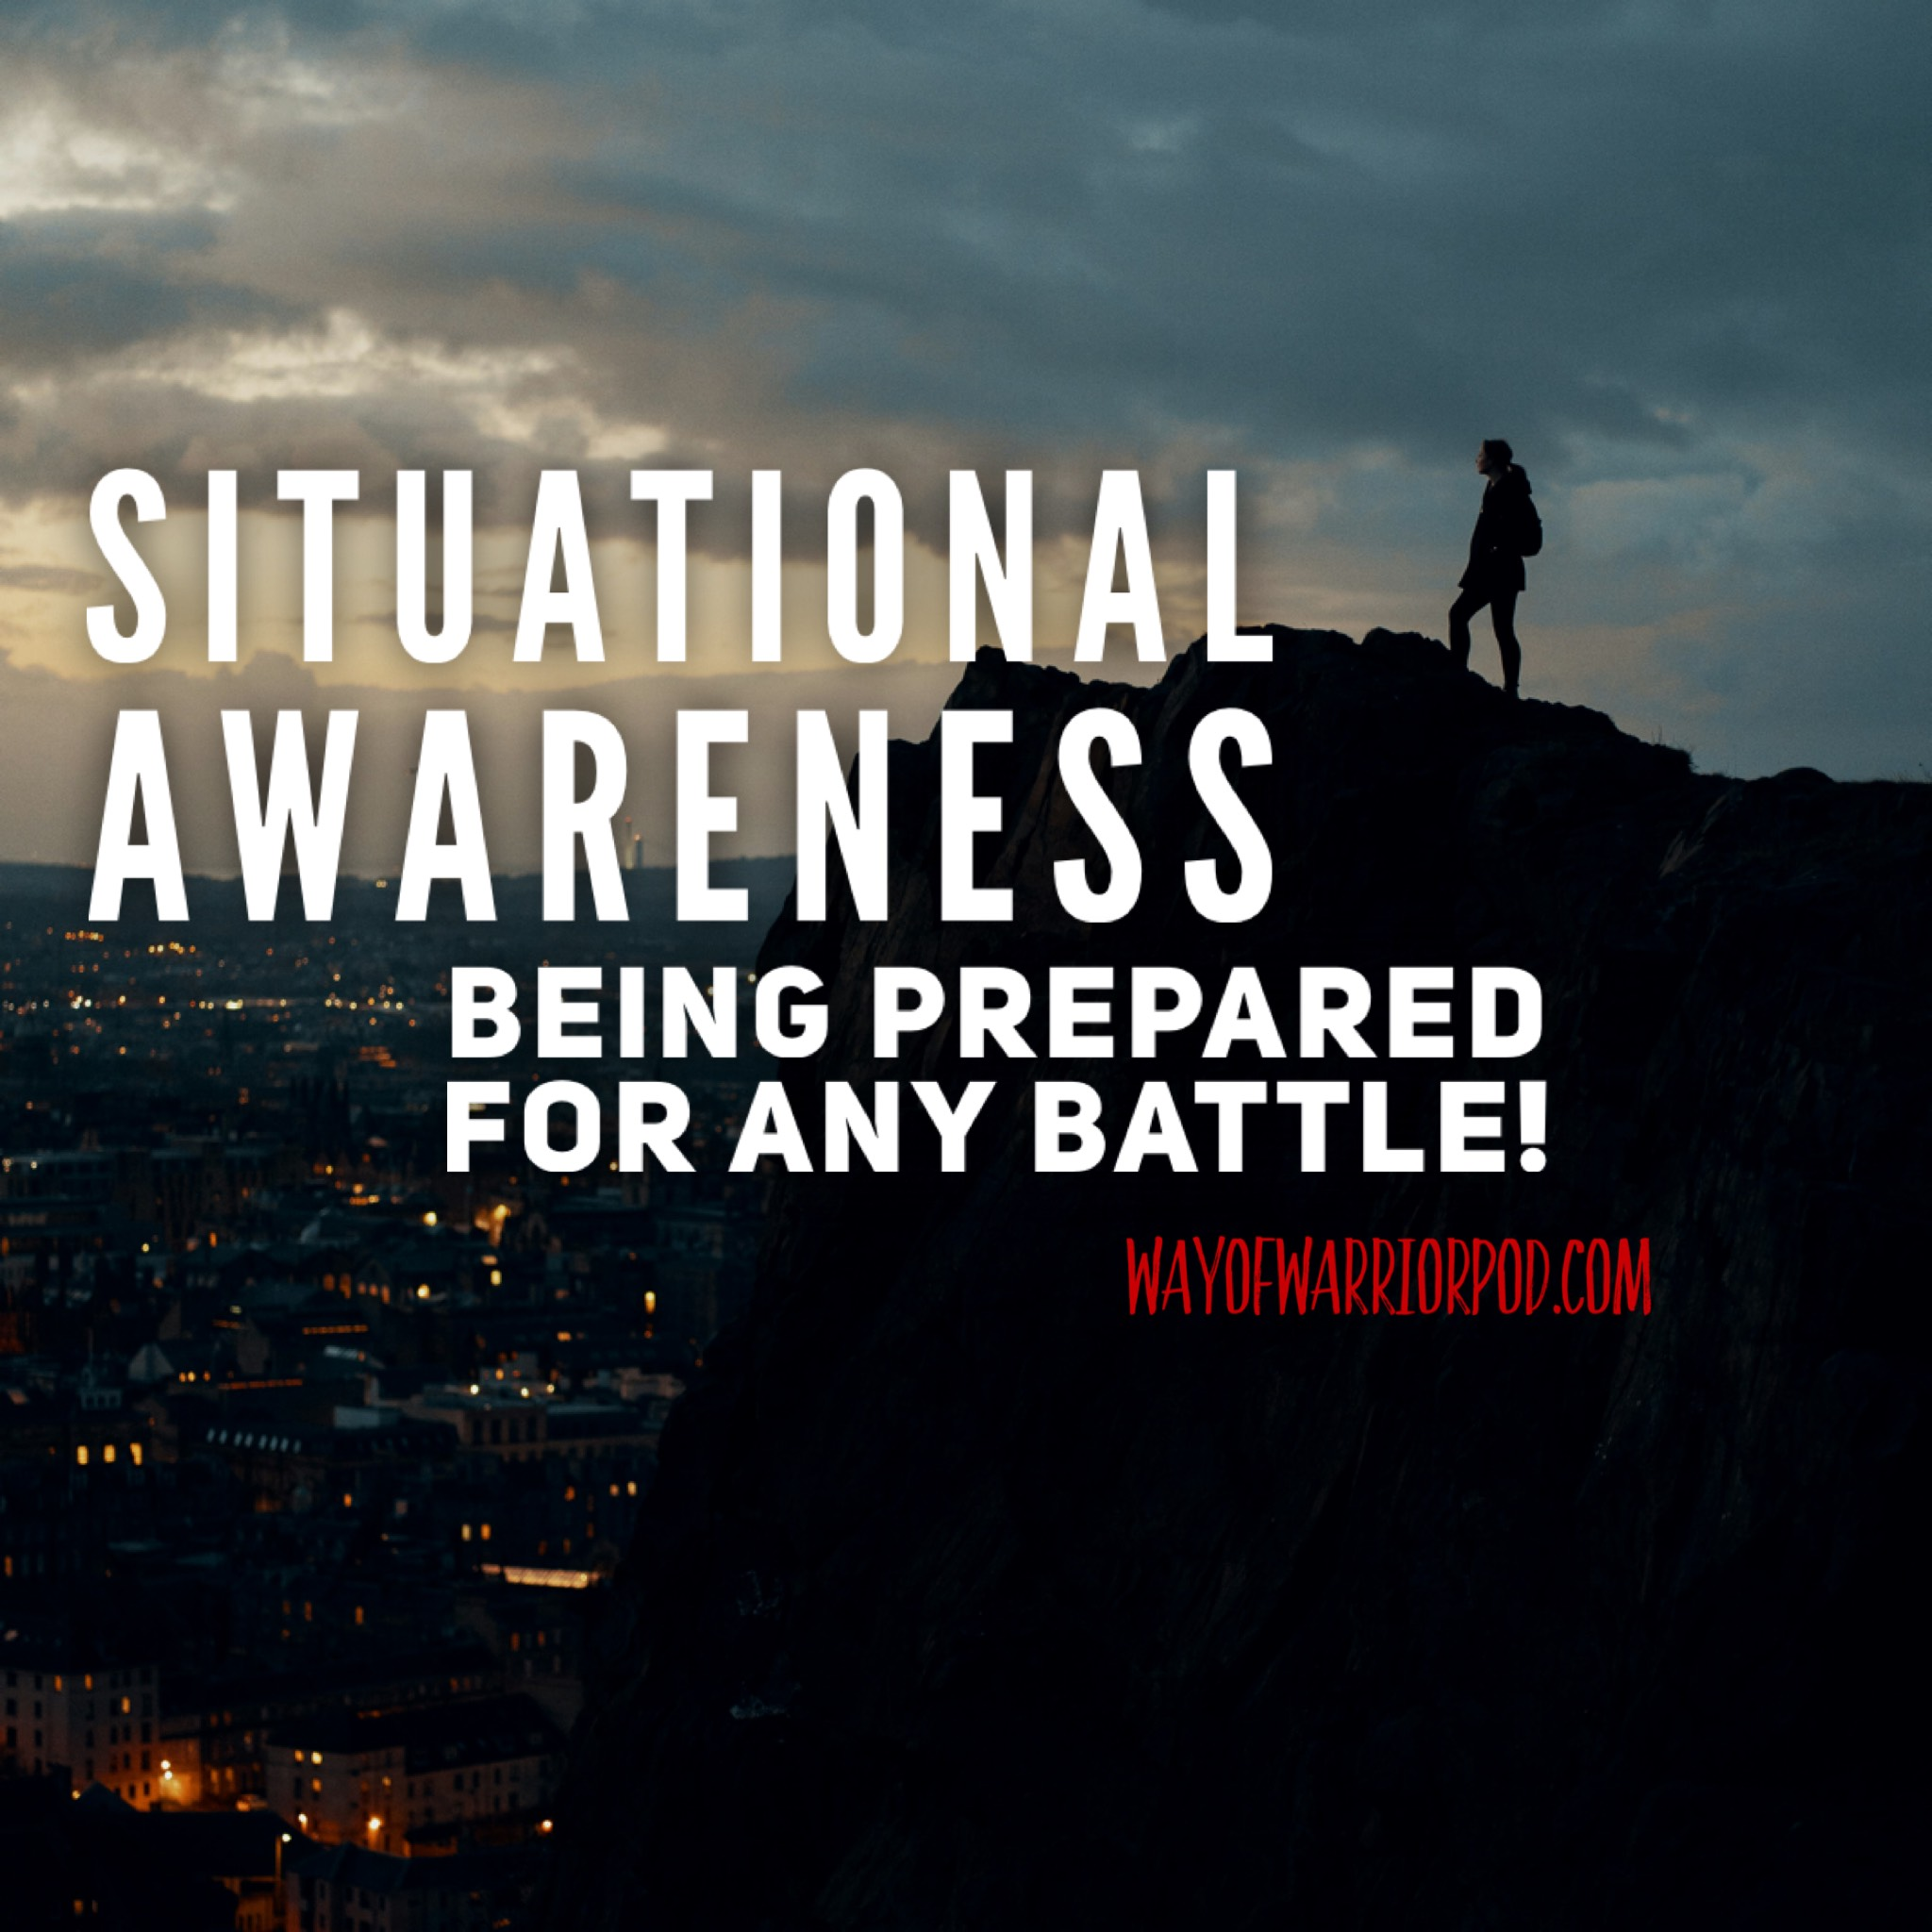 Situational Awareness: Being Prepared for any Battle!